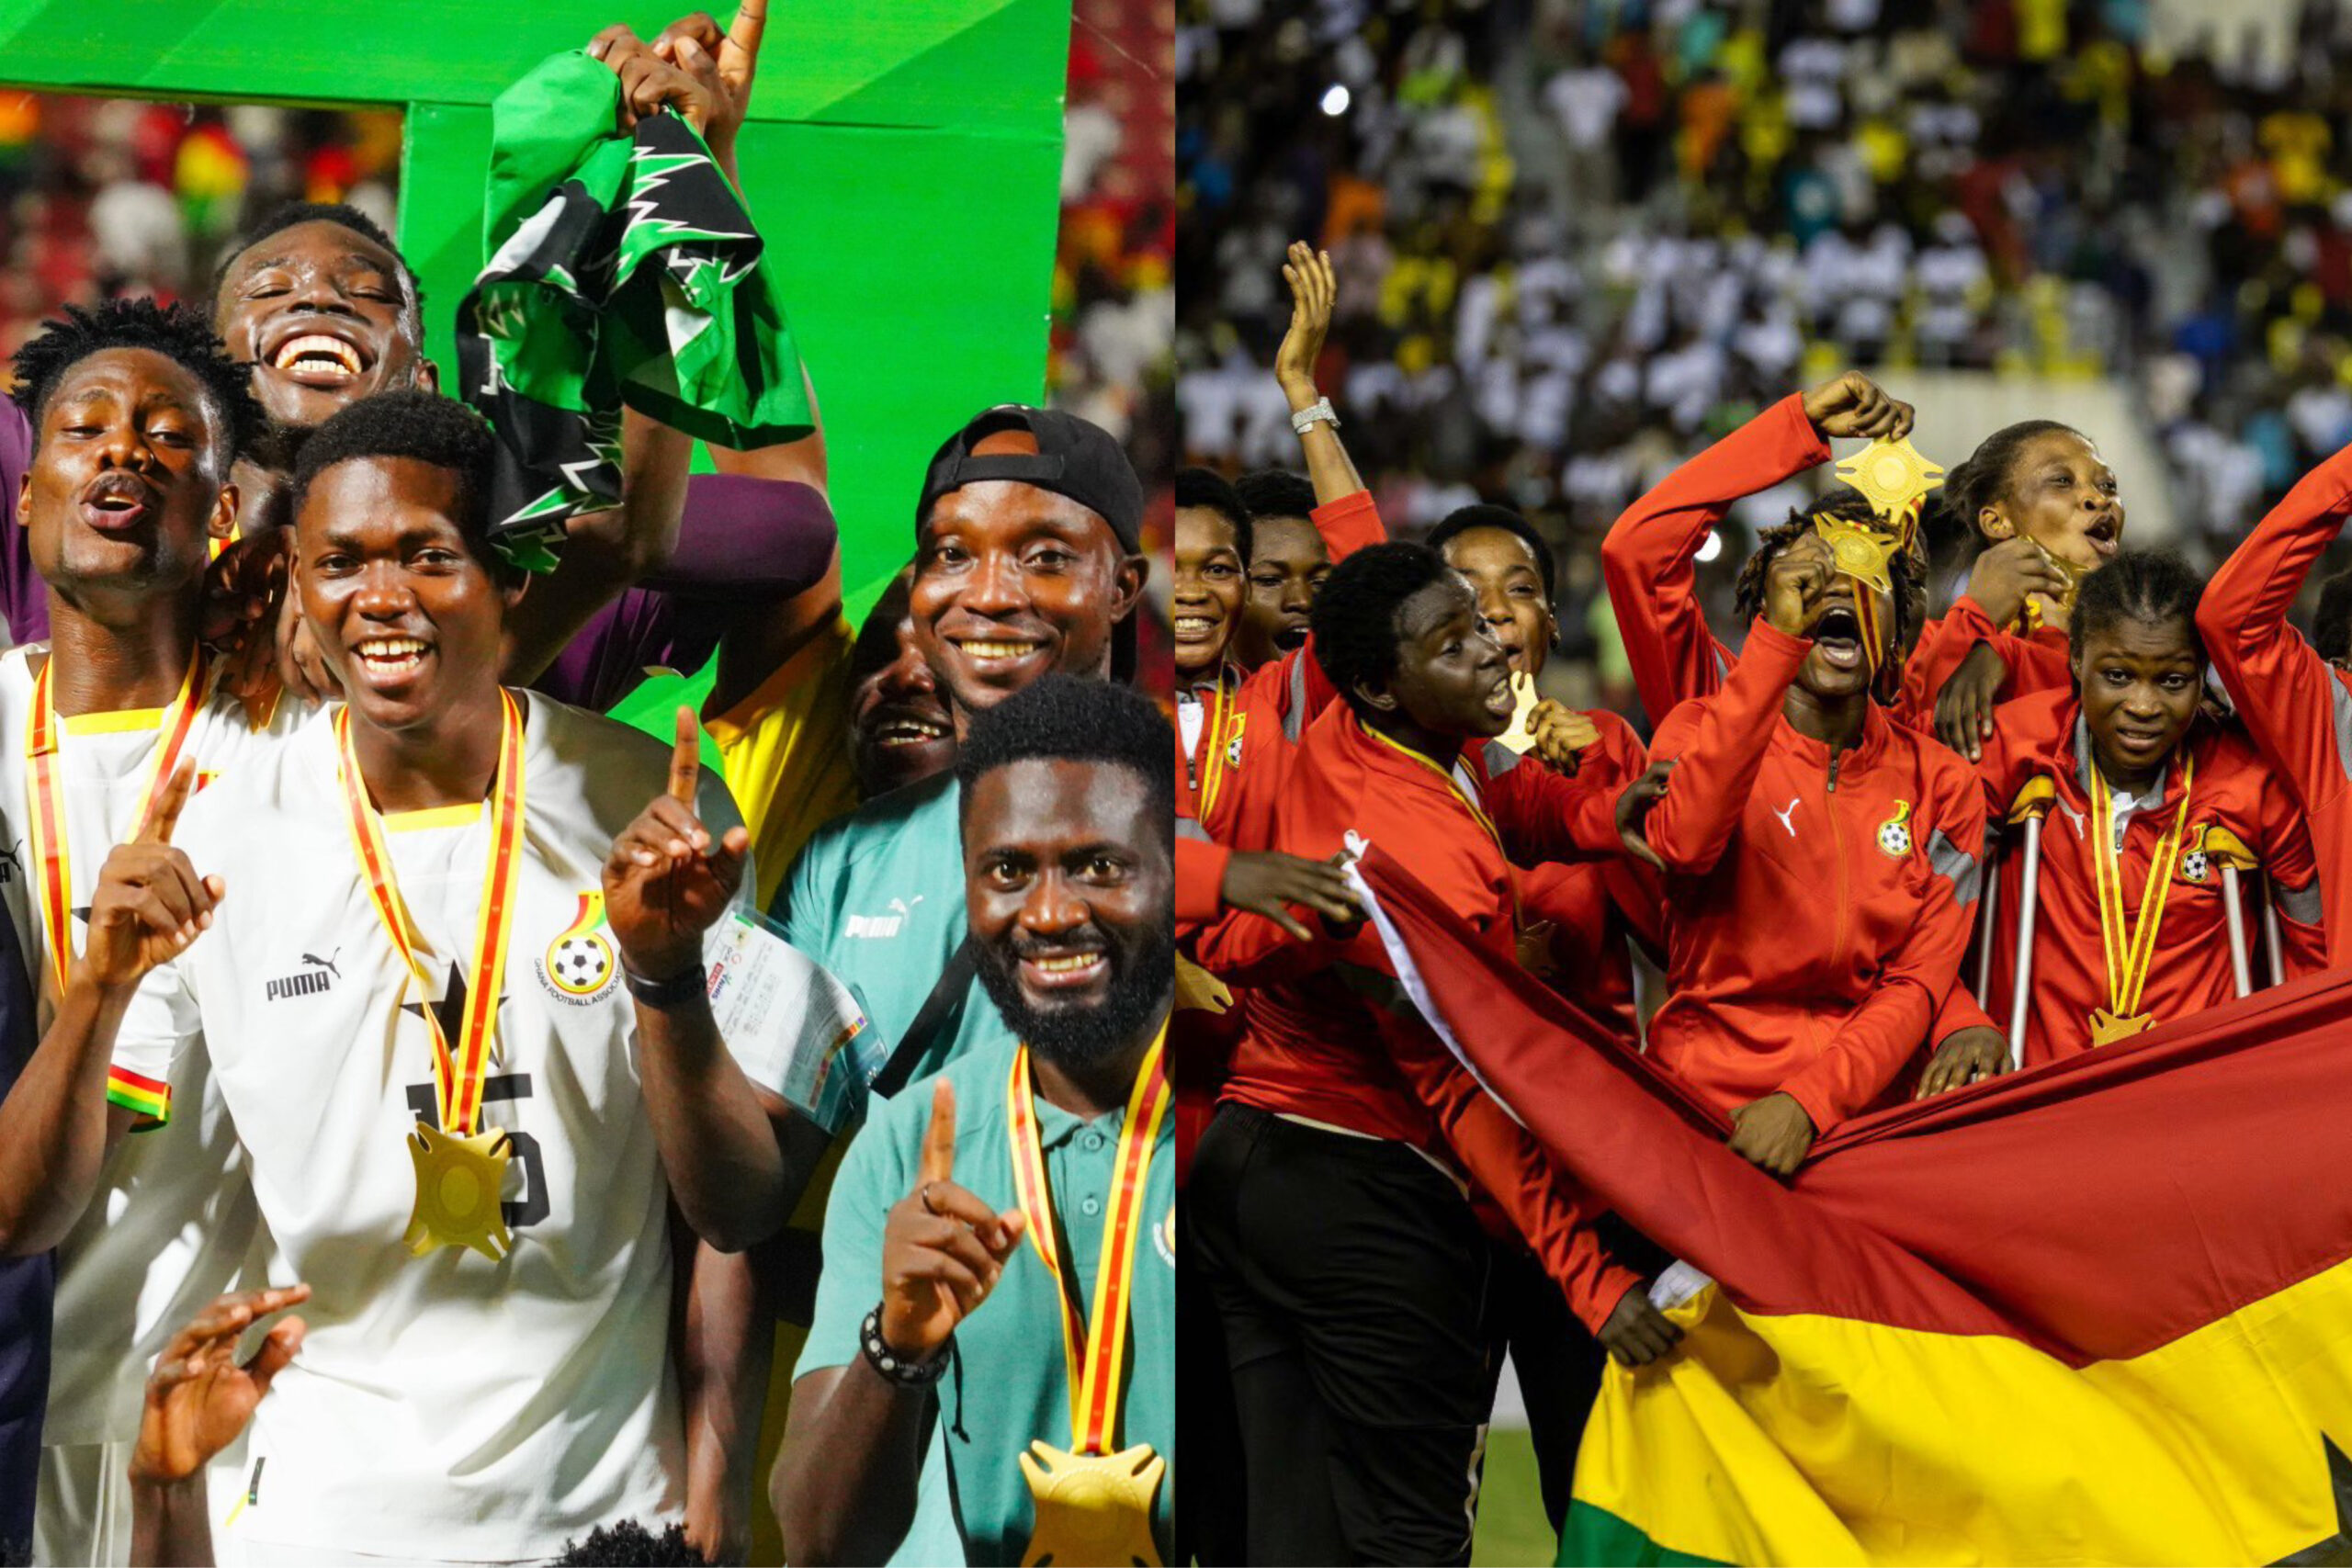 2023 African Games: Black Princesses, Satellites contribute gold medals to help Ghana earn its most medals in history